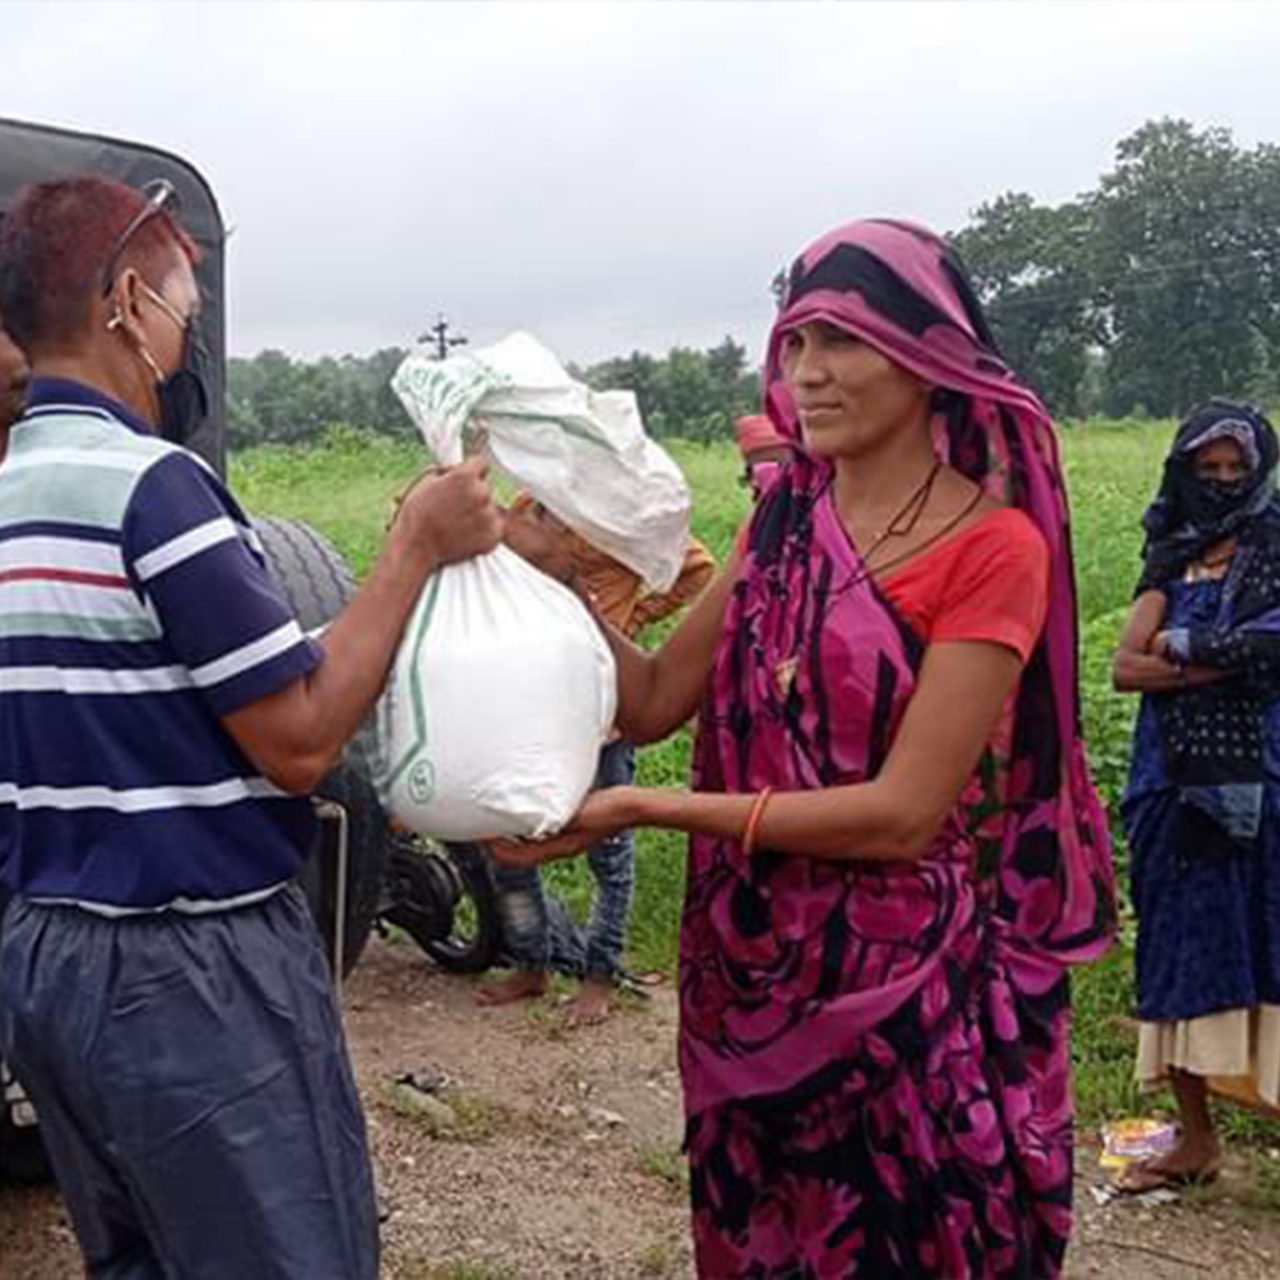 Bosconet, a charity organisation, bringing relief goods to locals in India during the COVID-19 pandemic 